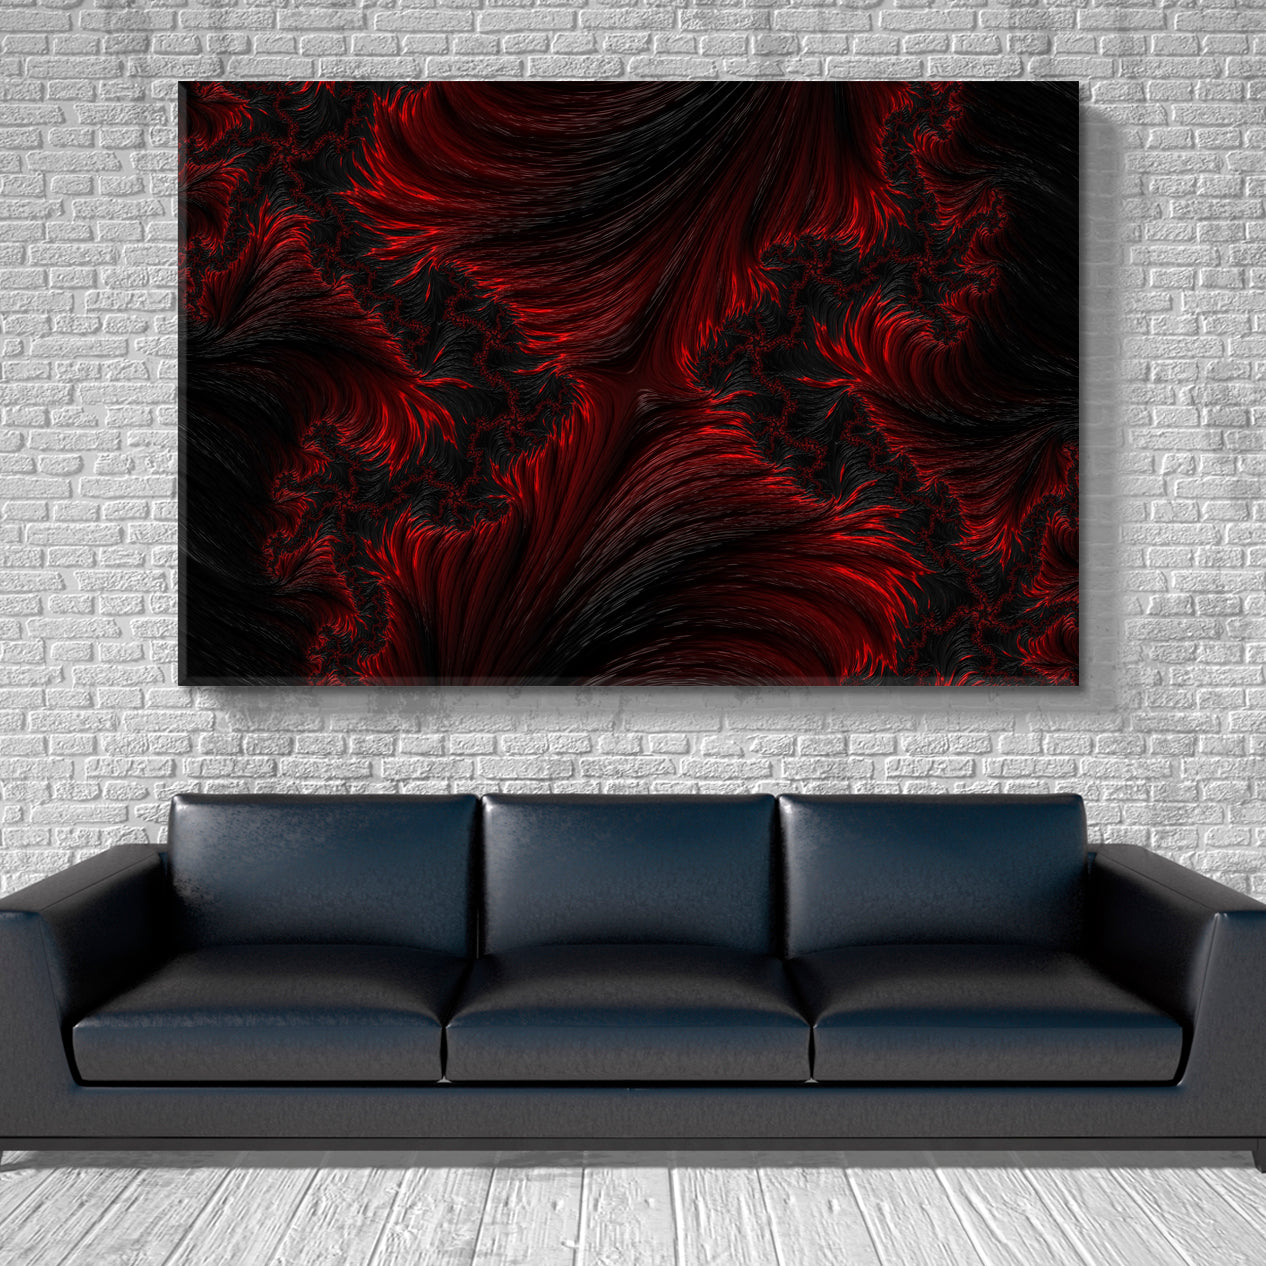 FRACTAL BLACK RED Graphic Design Abstract Creative Pattern Abstract Art Print Artesty 1 panel 24" x 16" 